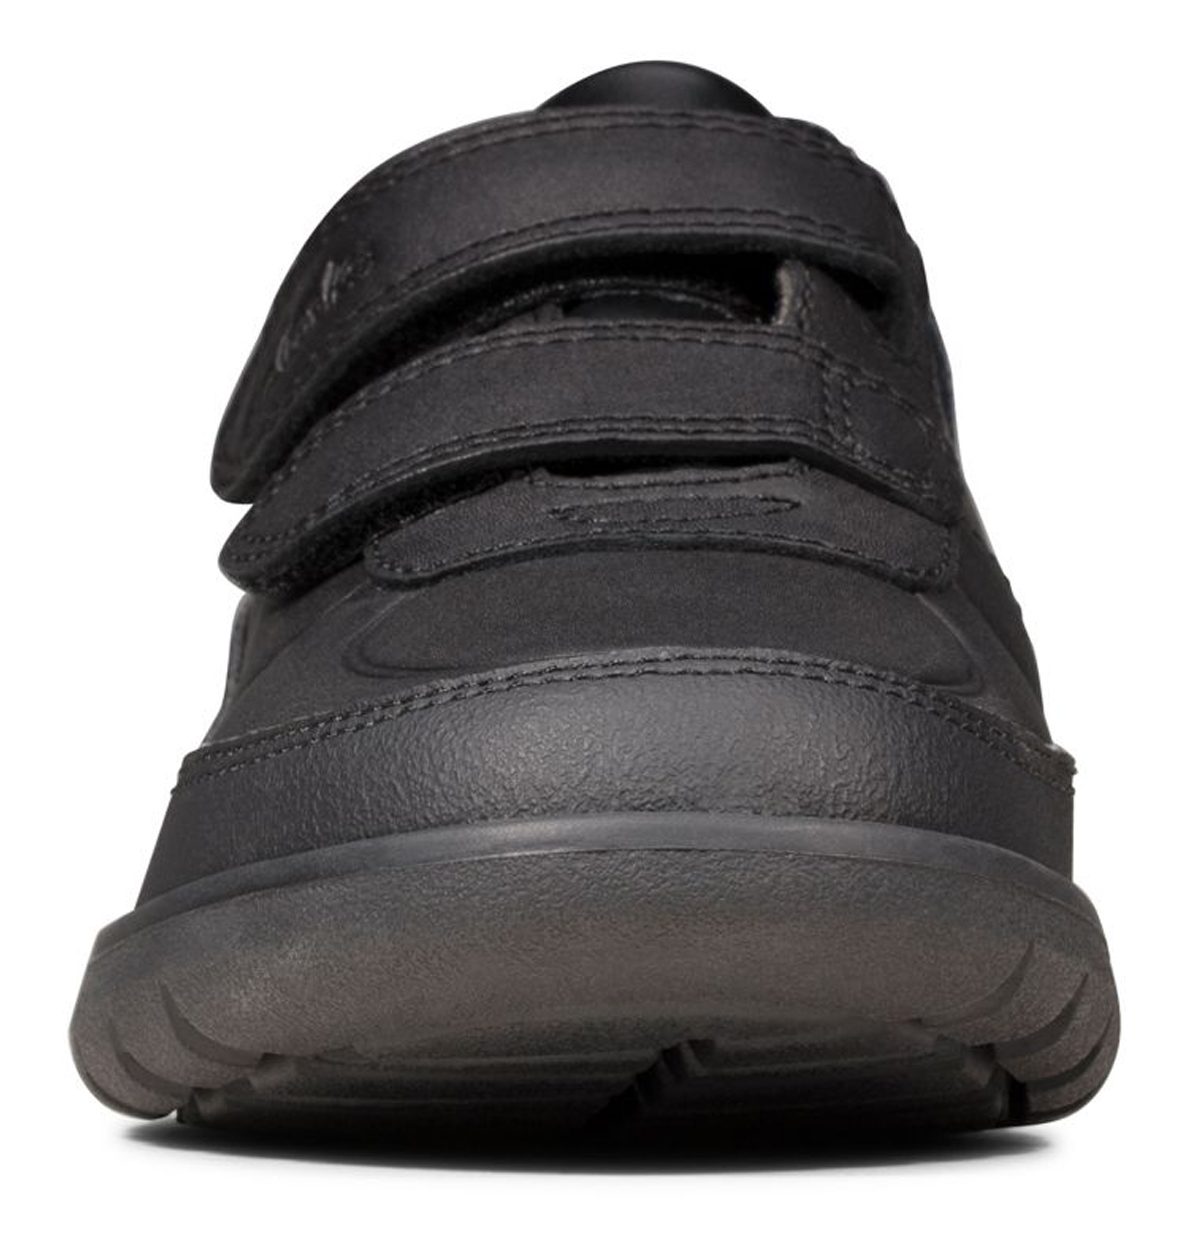 Clarks Scape Flare Kid Black Leather 26149401 - Boys School Shoes ...